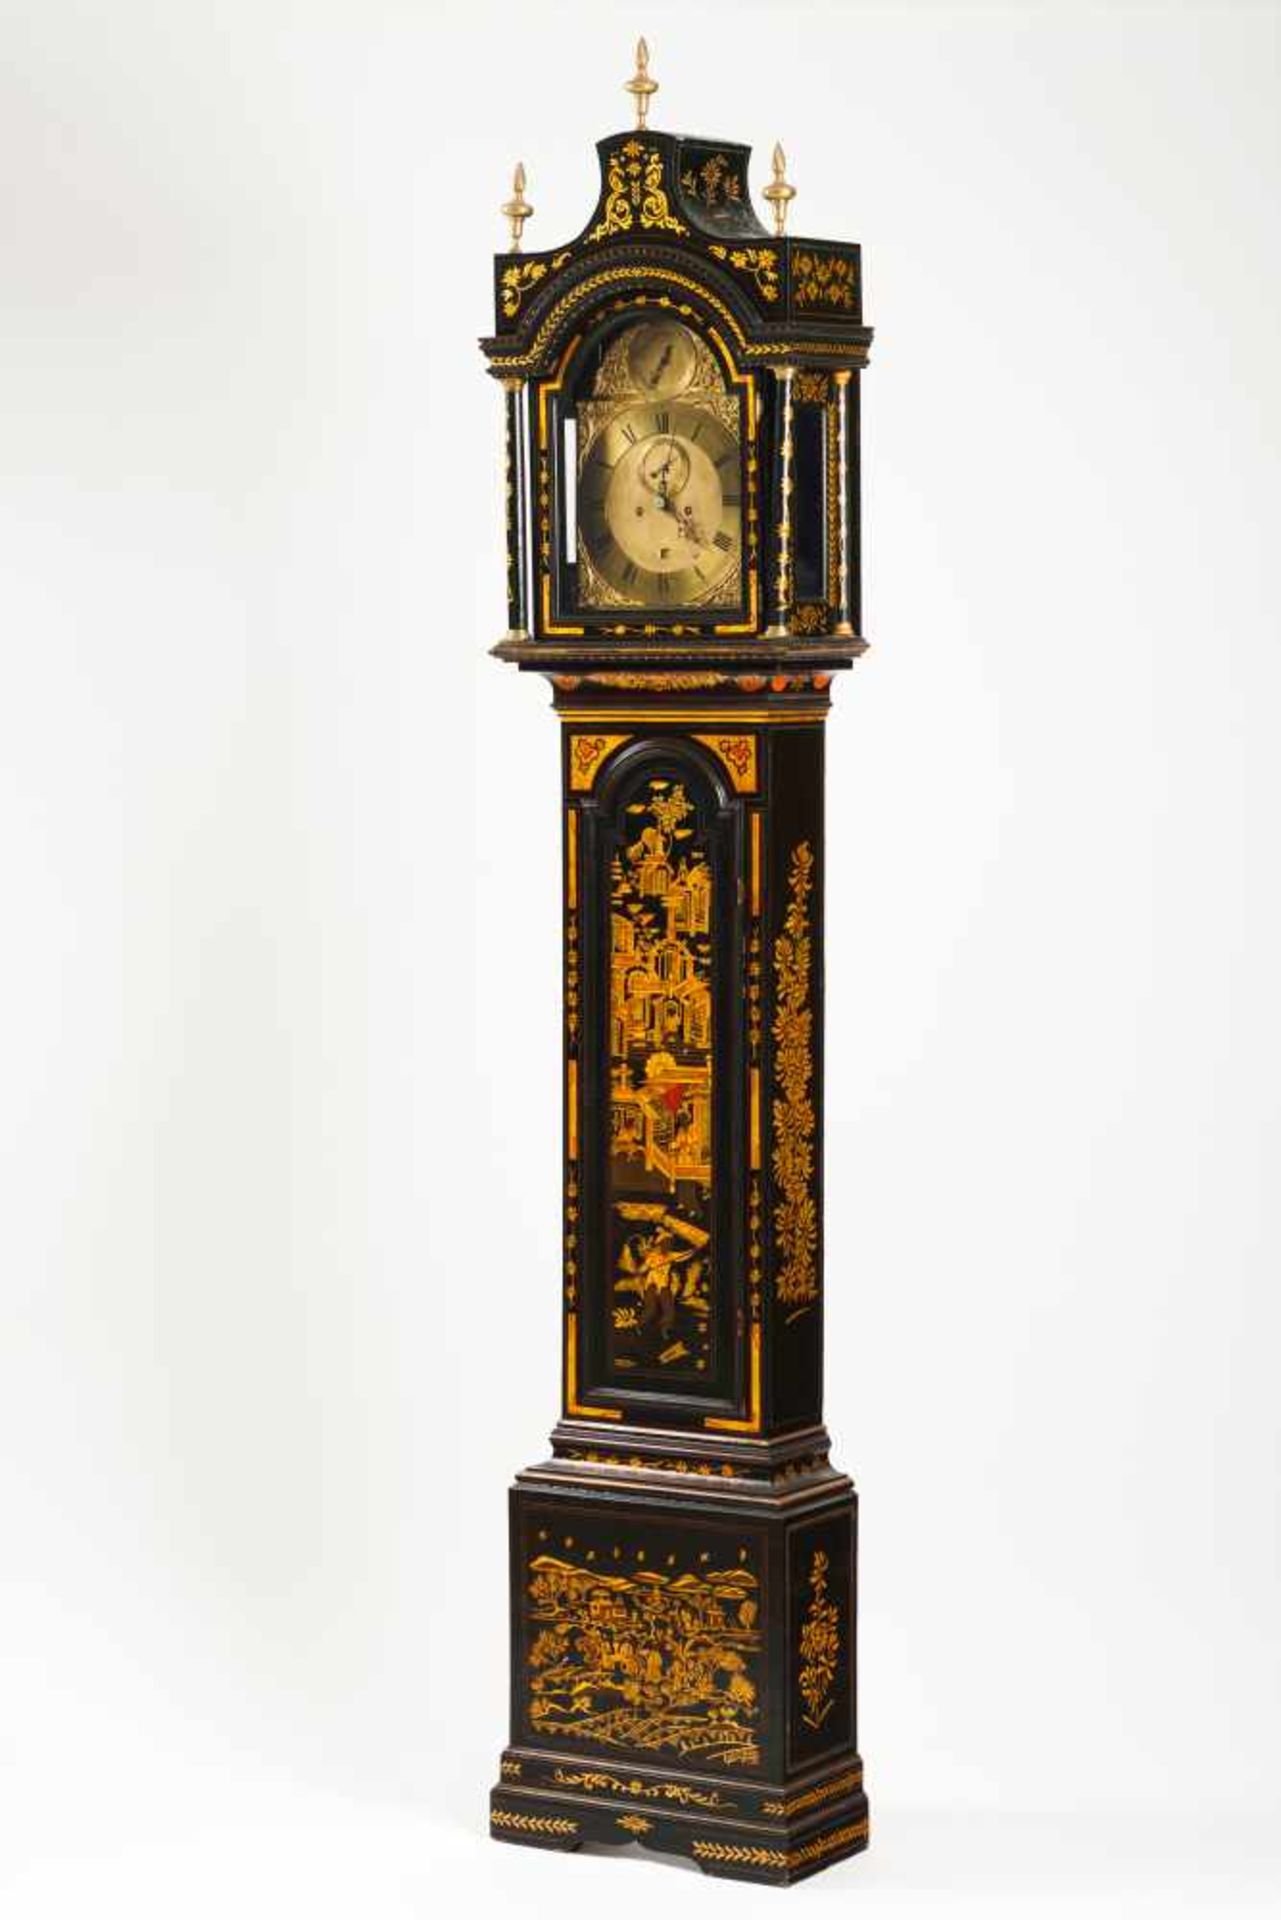 A 19th century portuguese long case clock.Walnut and chestnut, metal and enamel dial.Jéremie Girod -